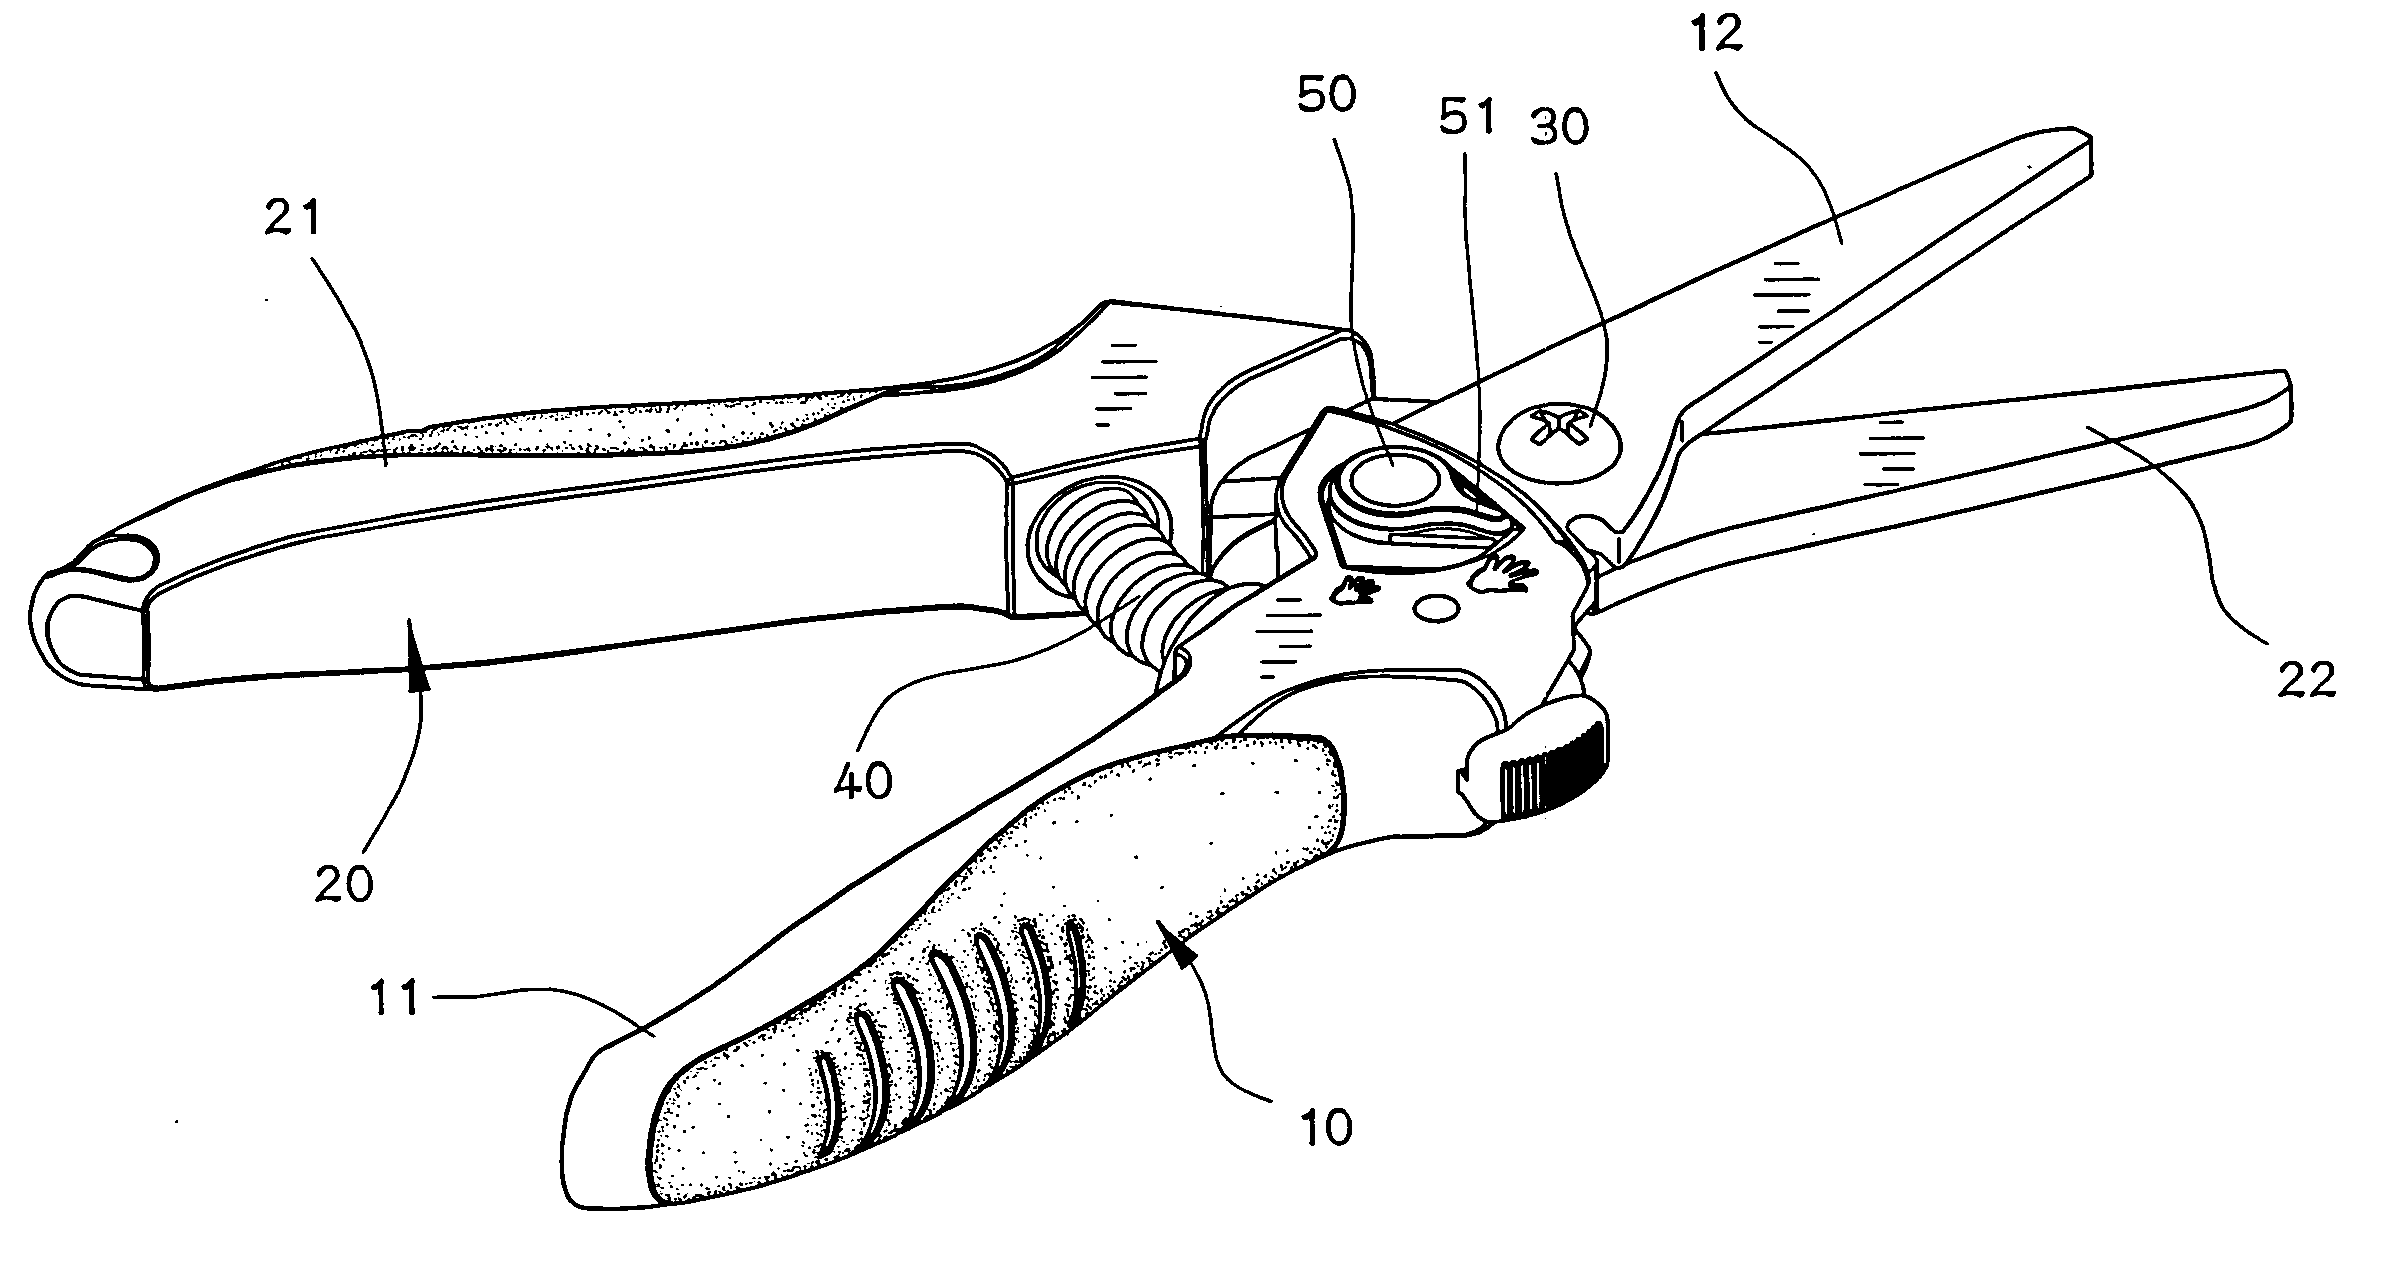 Control mechanism for controlling width of two cutting blades